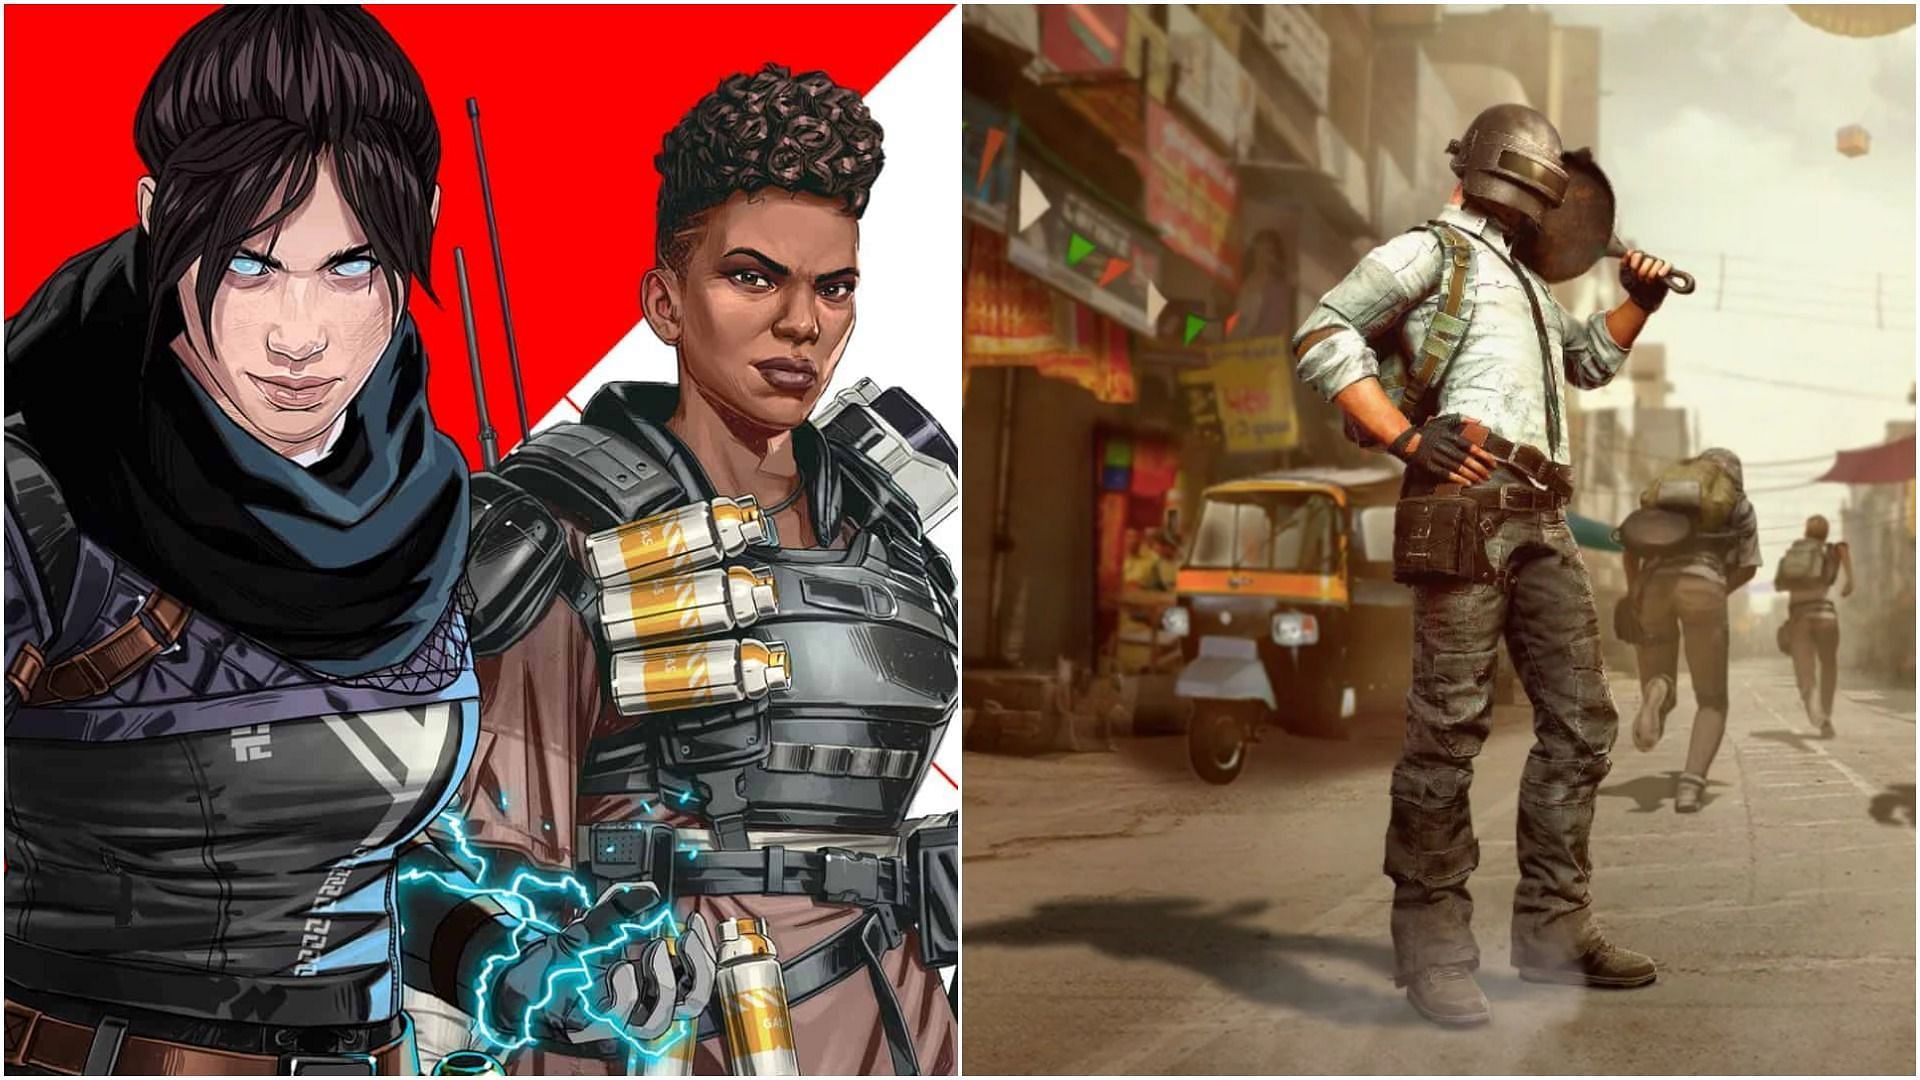 Apex legends Mobile is the latest entrant in a crowded market space (Images via Electronic Arts, Krafton)